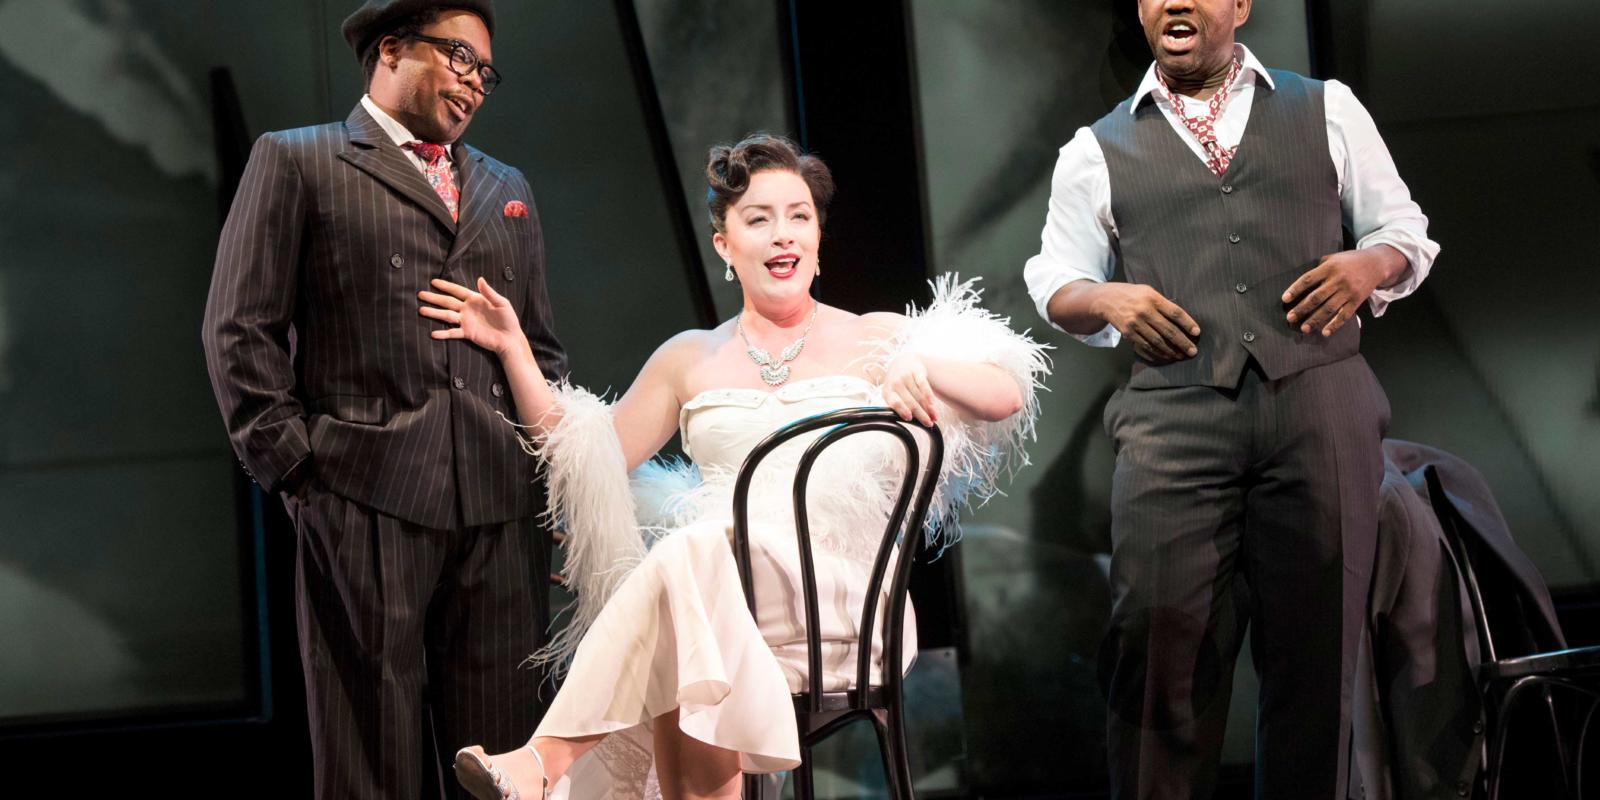 a women in a white dress sat on a chair singing to two men dressed in suits